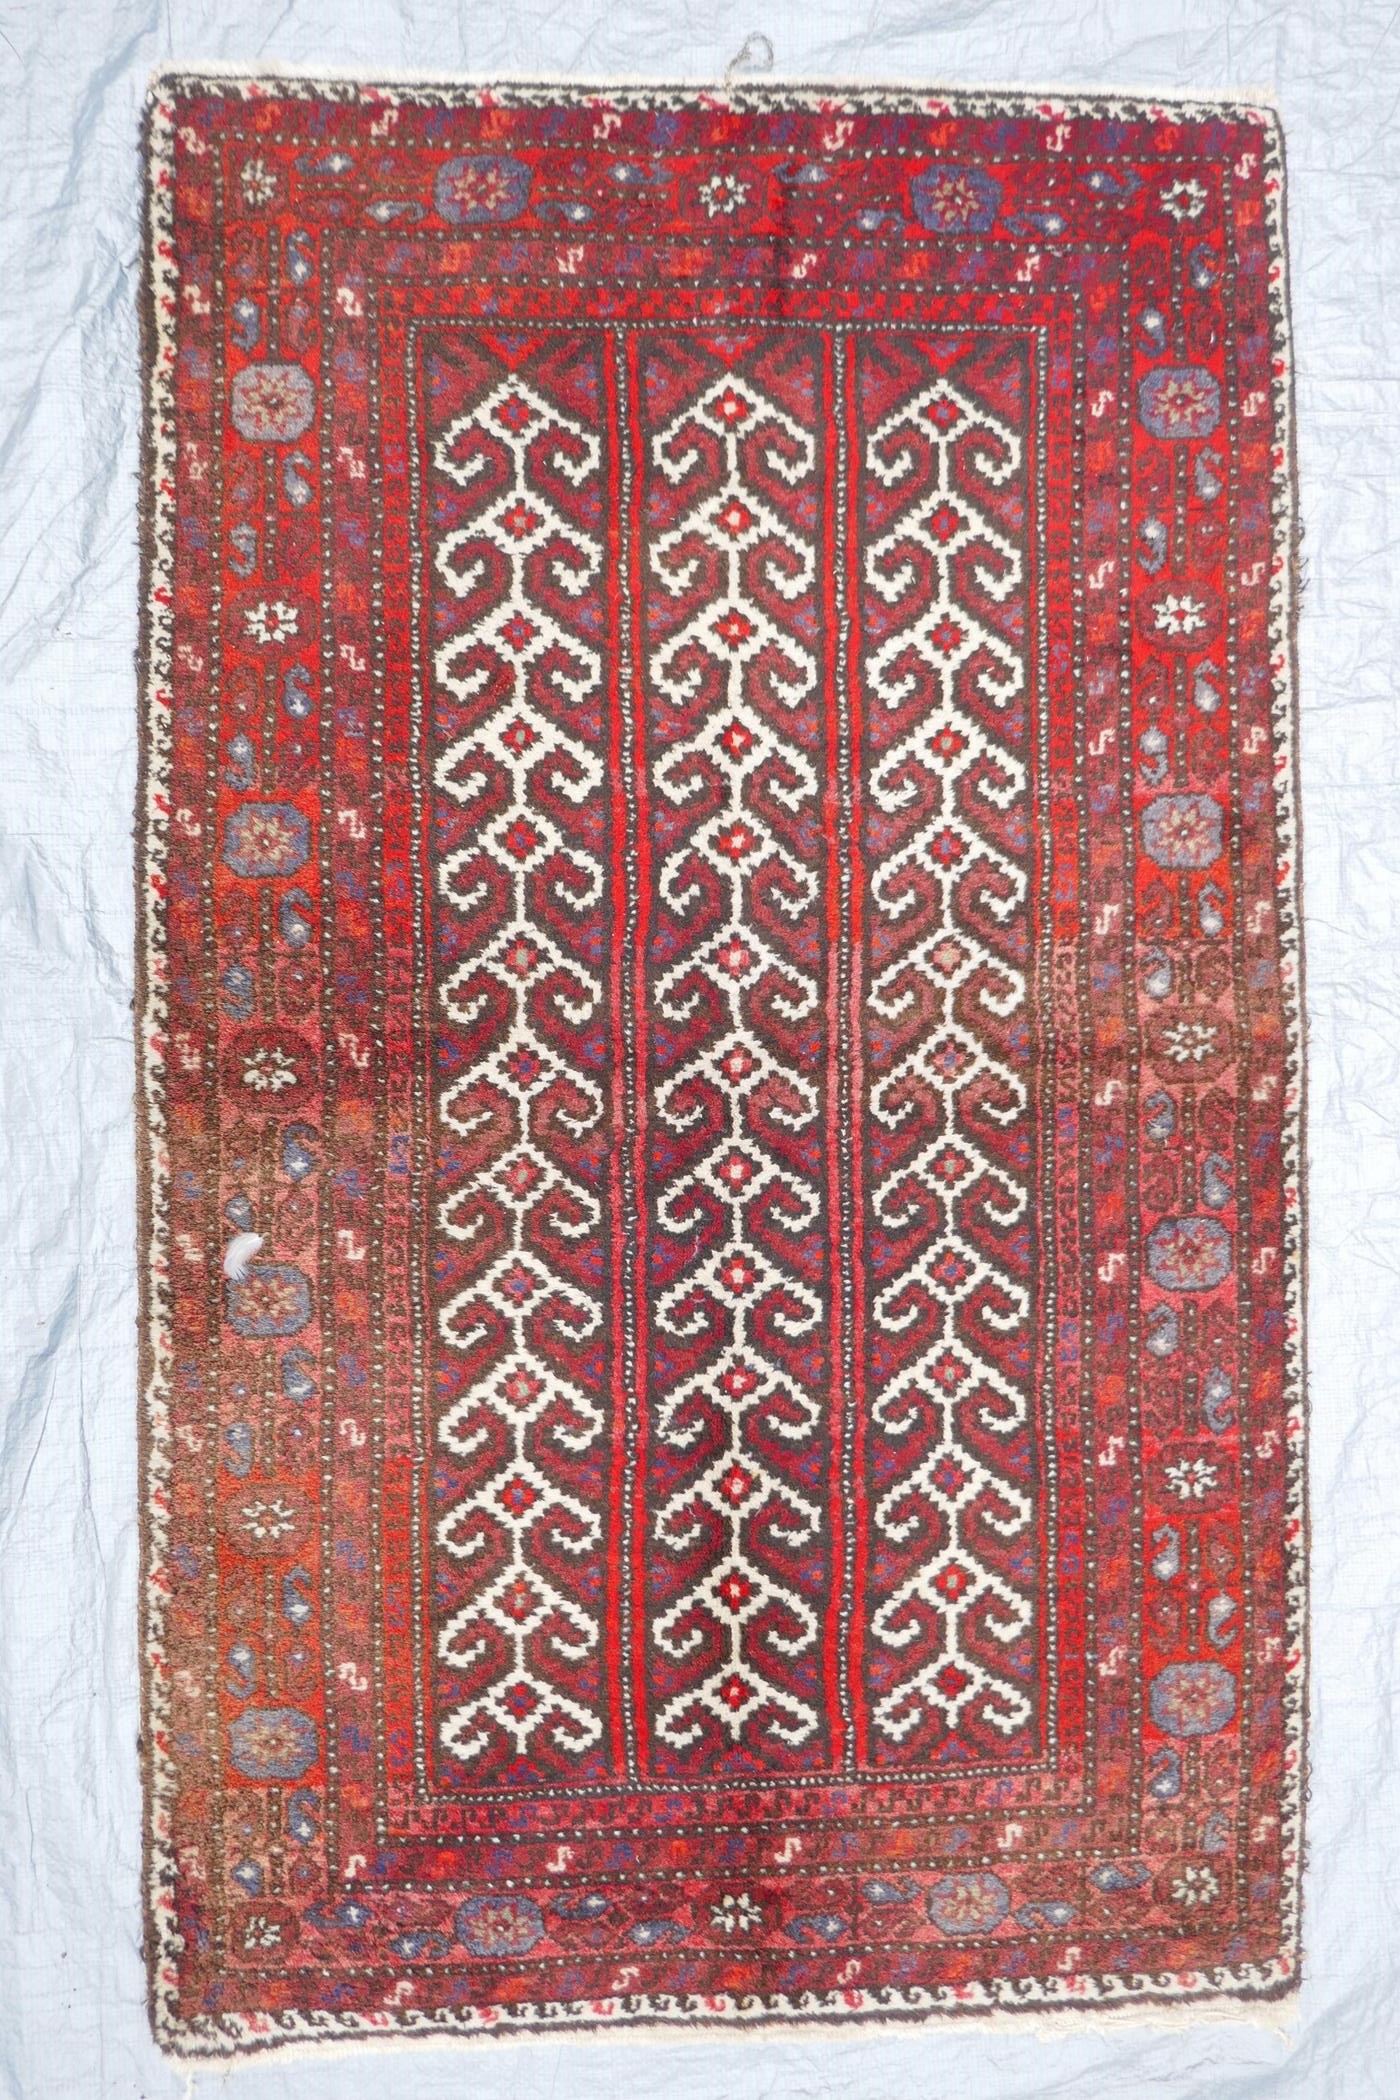 A Middle Eastern full pile red ground wool rug with a three panel geometric design, 34" x 56" - Image 2 of 4